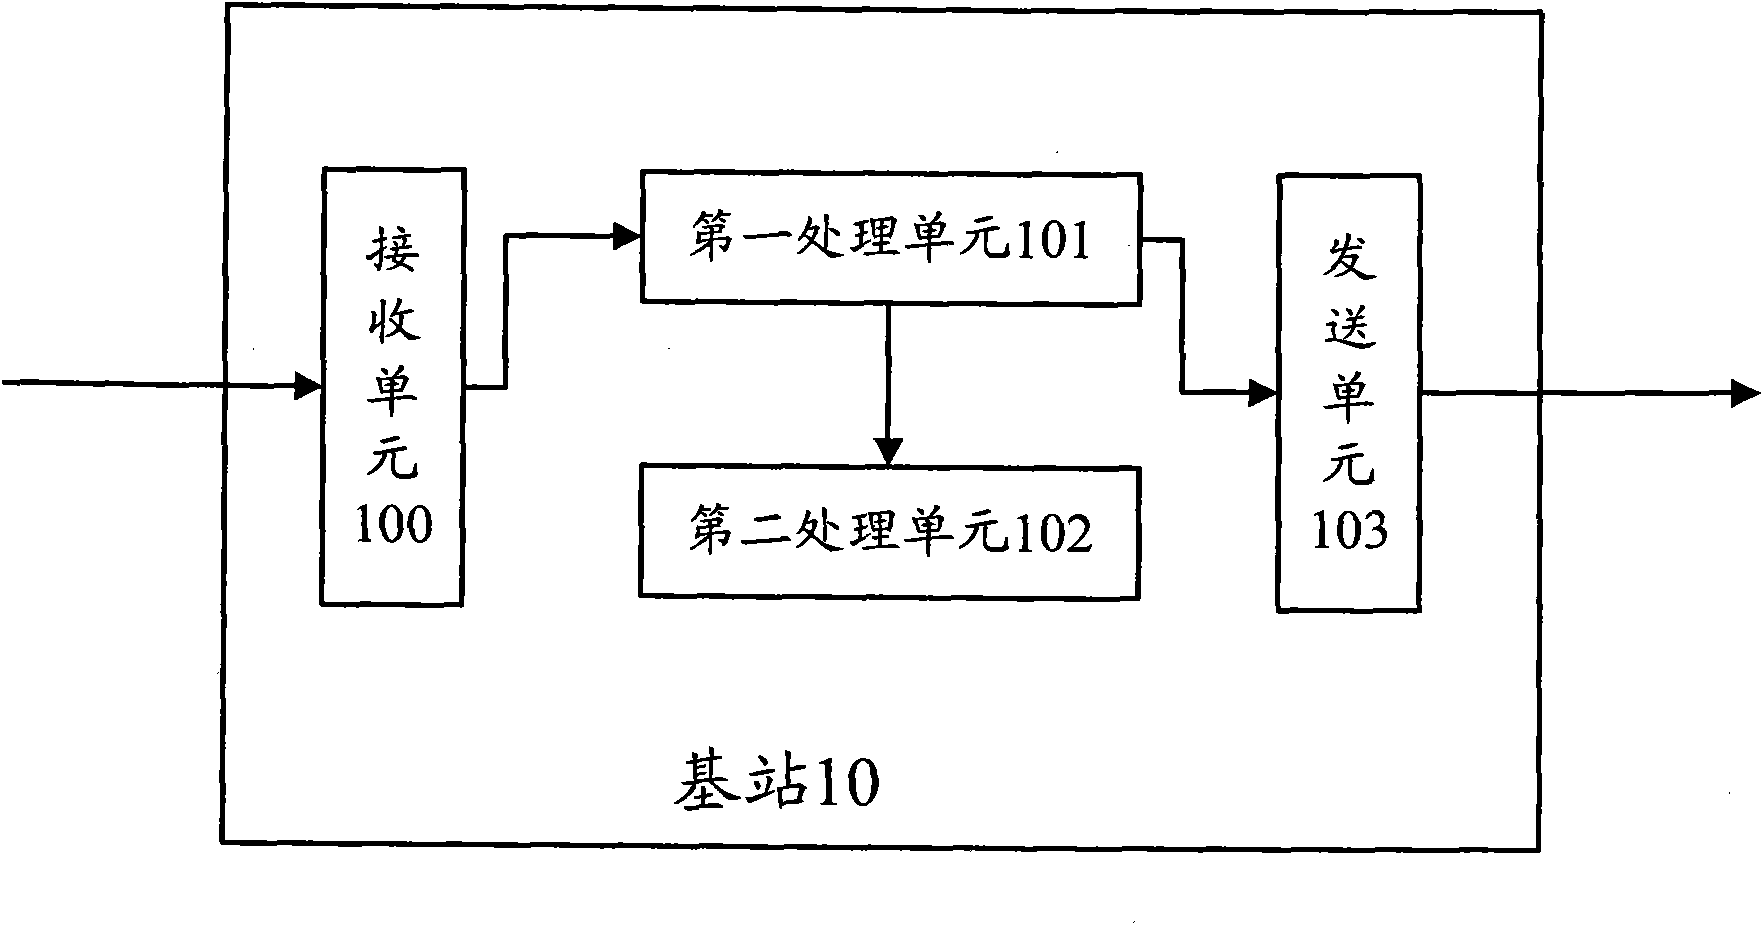 MIMO-based downlink data transmission method, device and system